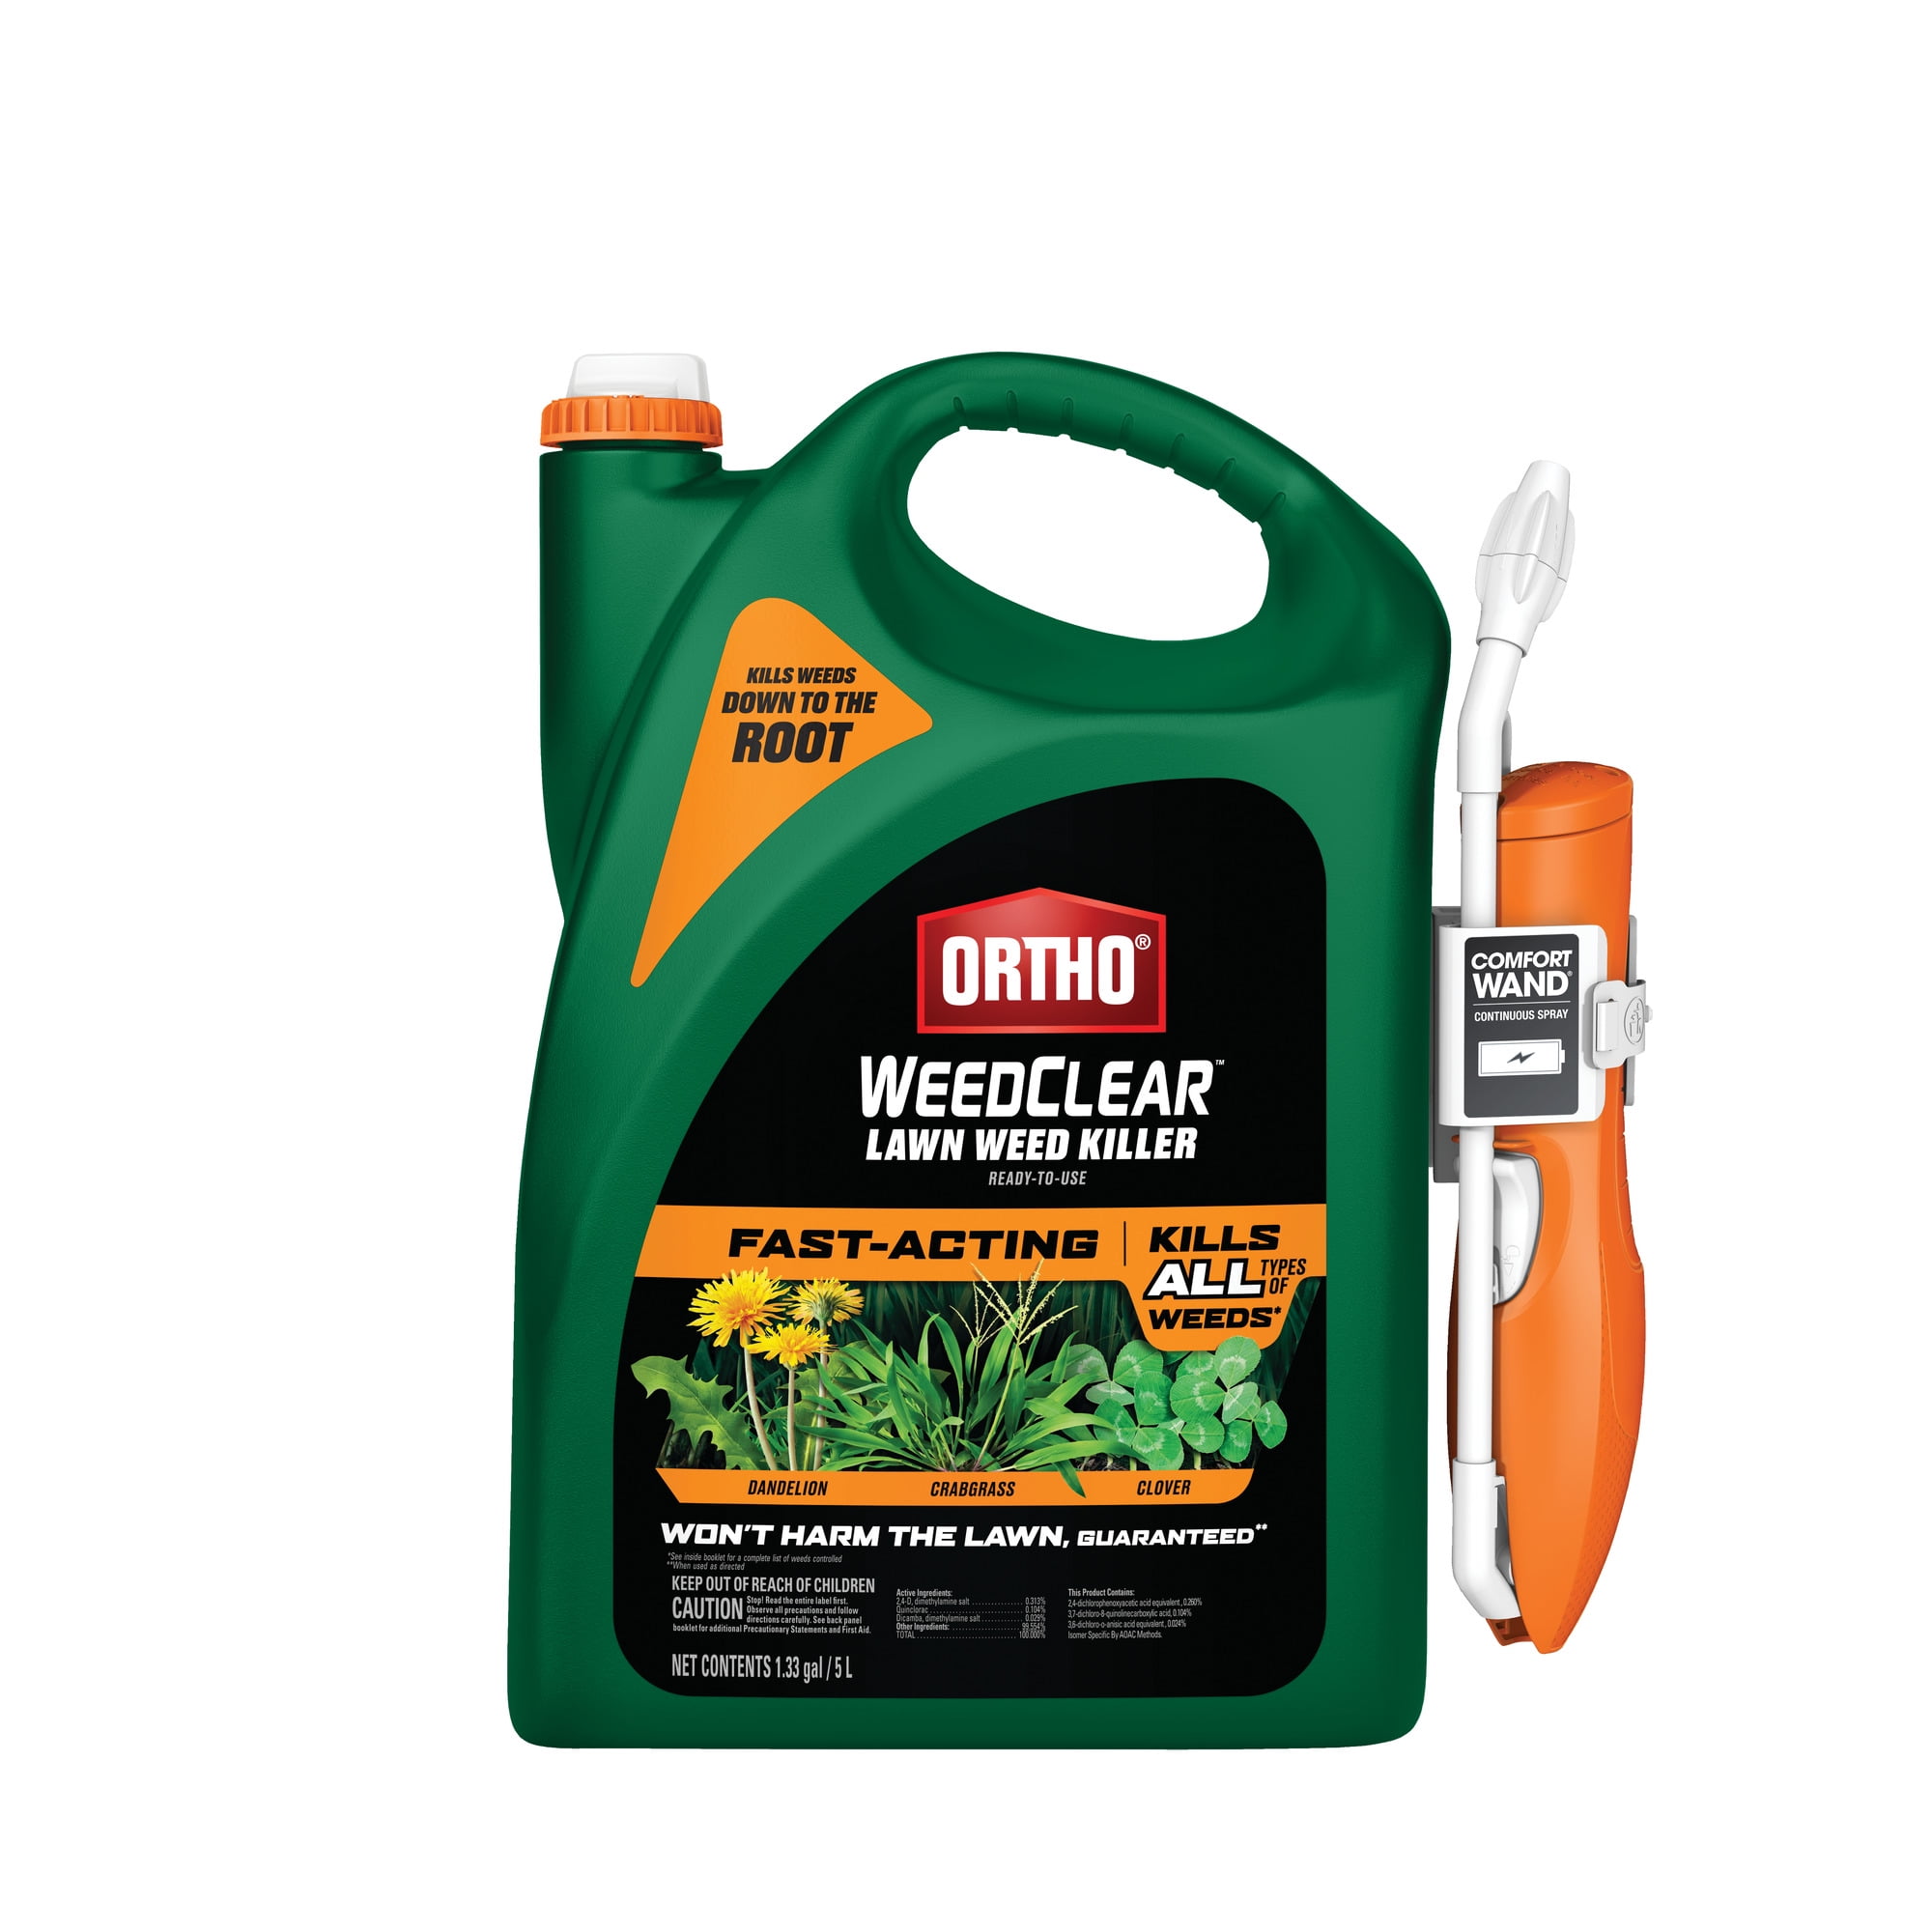 Crabgrass Killer Ortho WeedClear Lawn Weed Killer Concentrate Also Kills Dand 